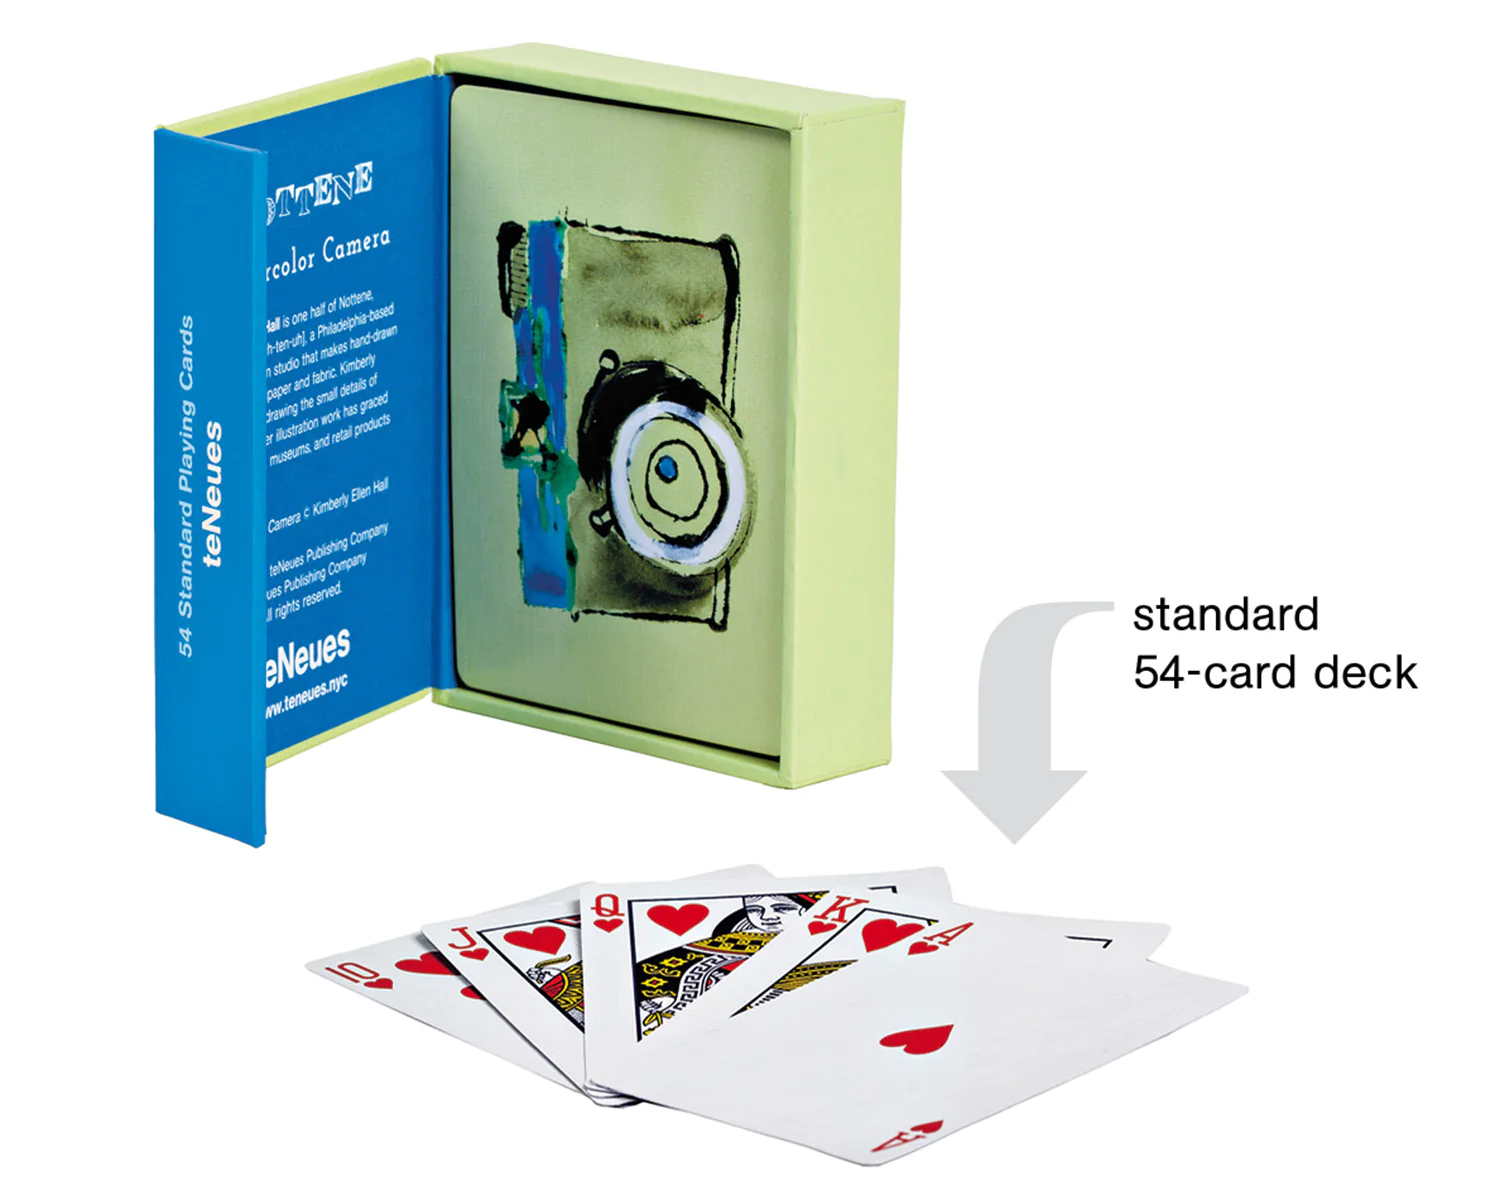 Playing Cards - Watercolor Camera - Danshire Market and Design 